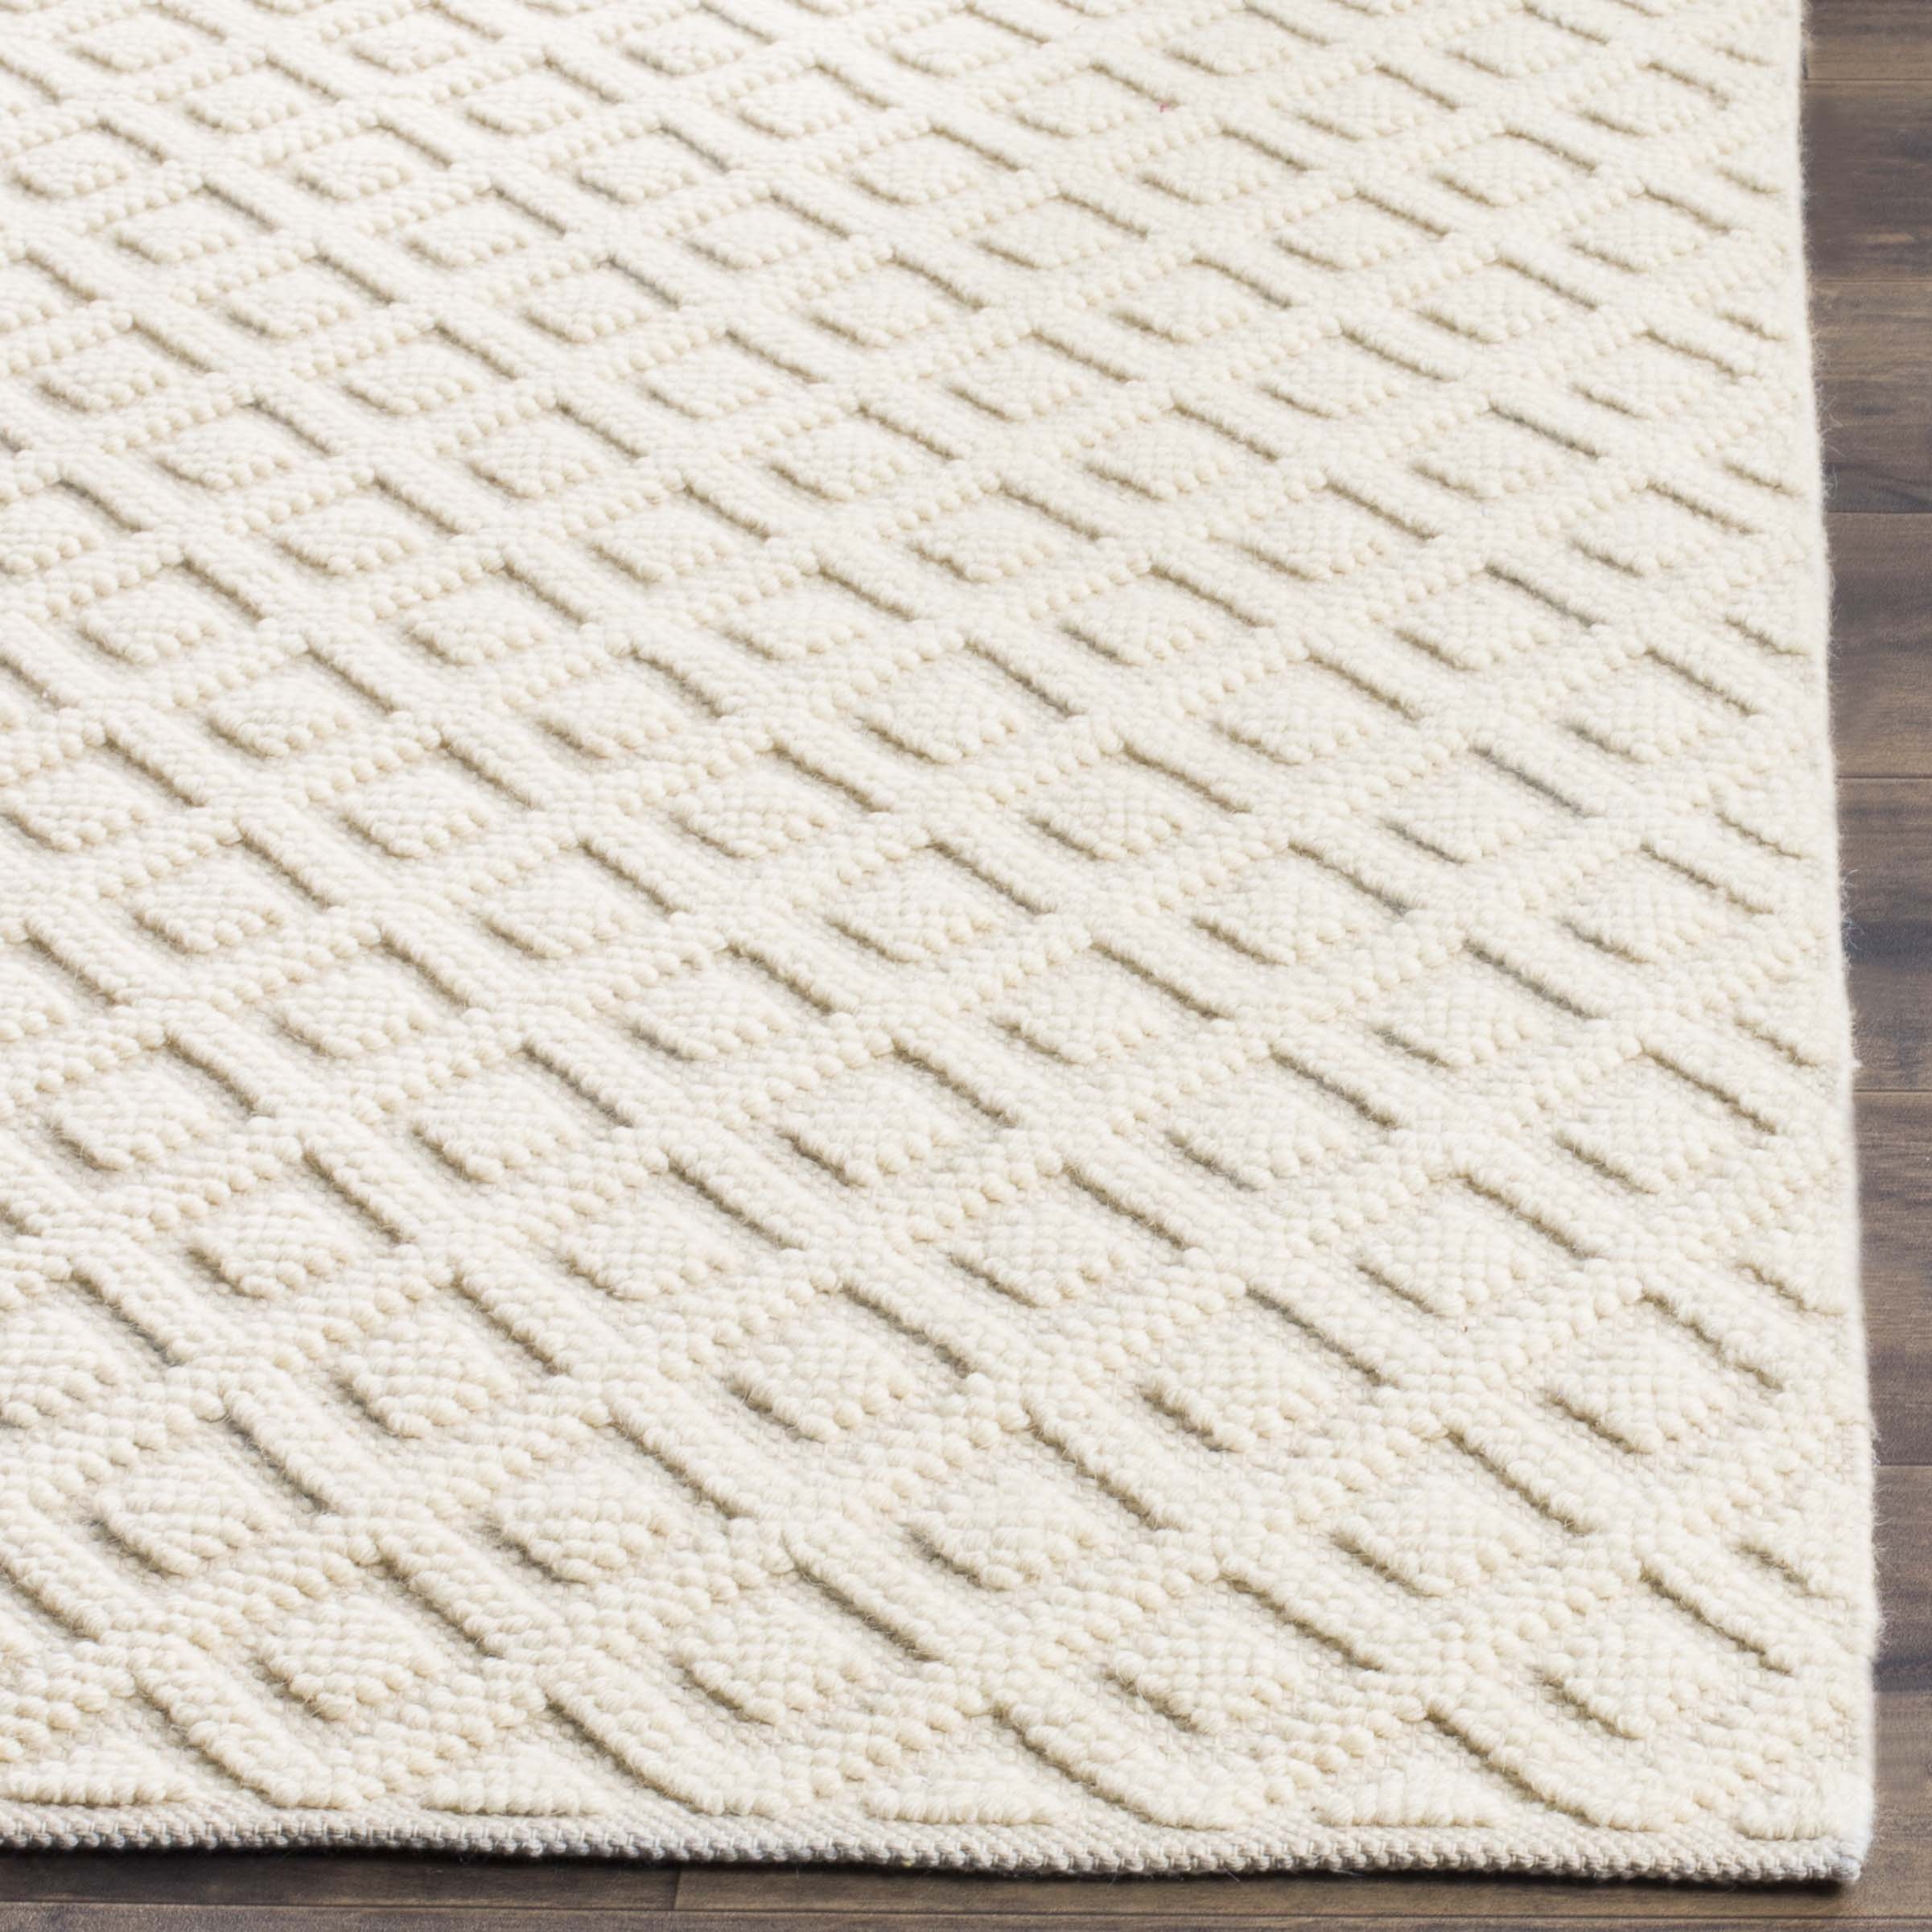 Arlo Home Hand Woven Area Rug, VRM104A, Ivory,  3' X 5' - Image 2